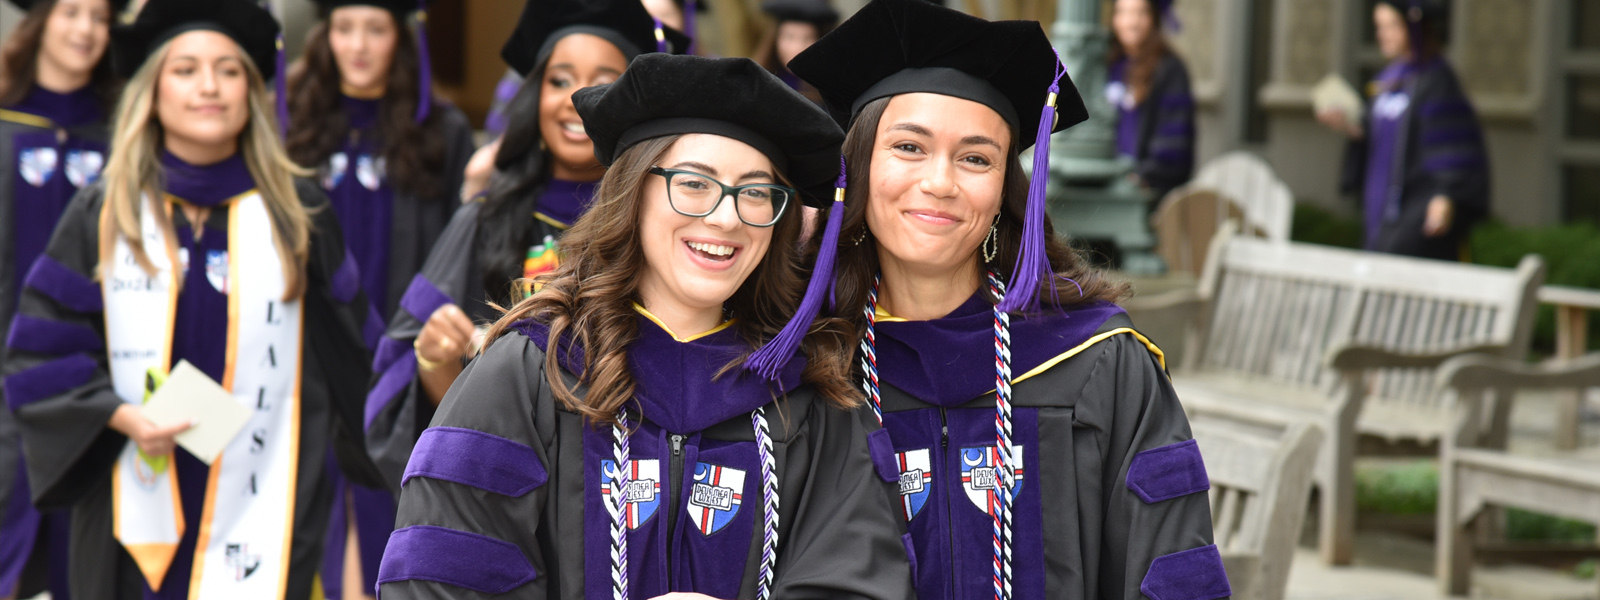 Law students walk to Commencement